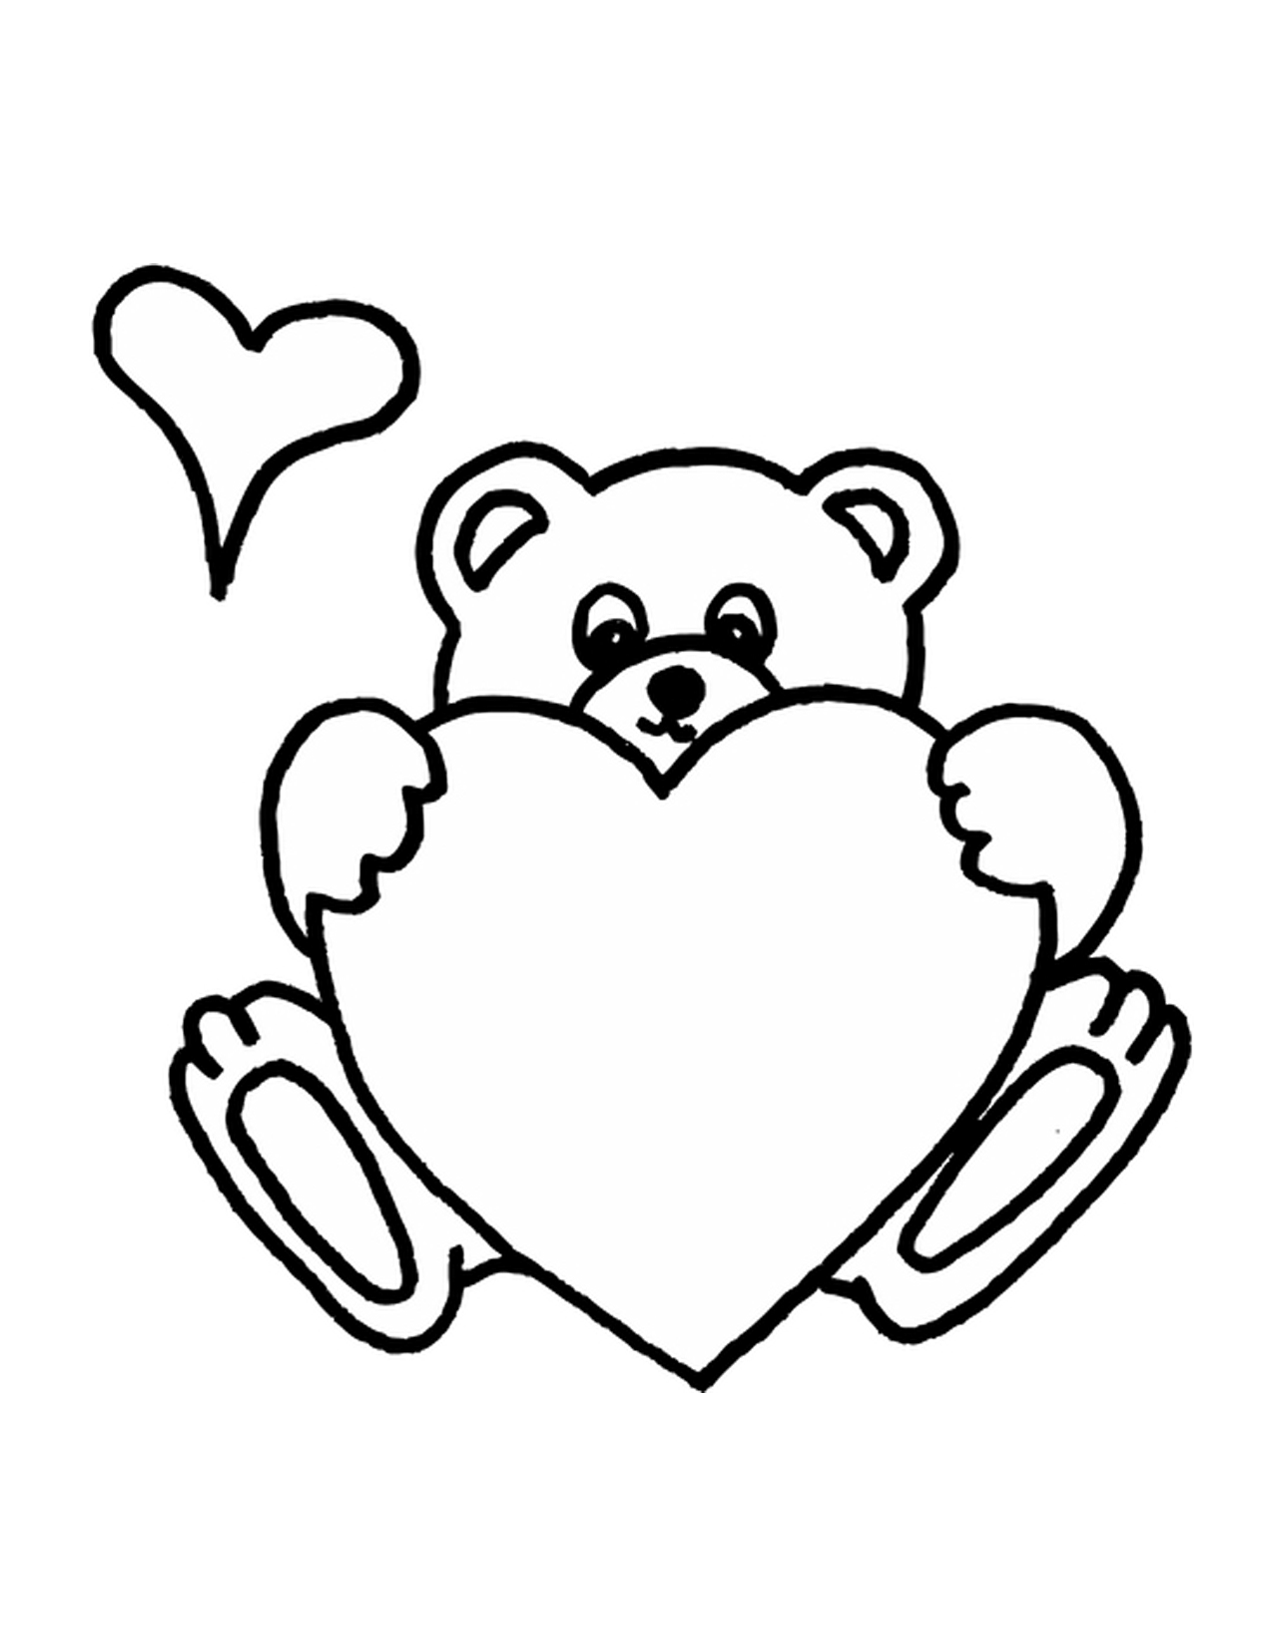 Teddy Bear Coloring Pages | Printable Coloring Pages